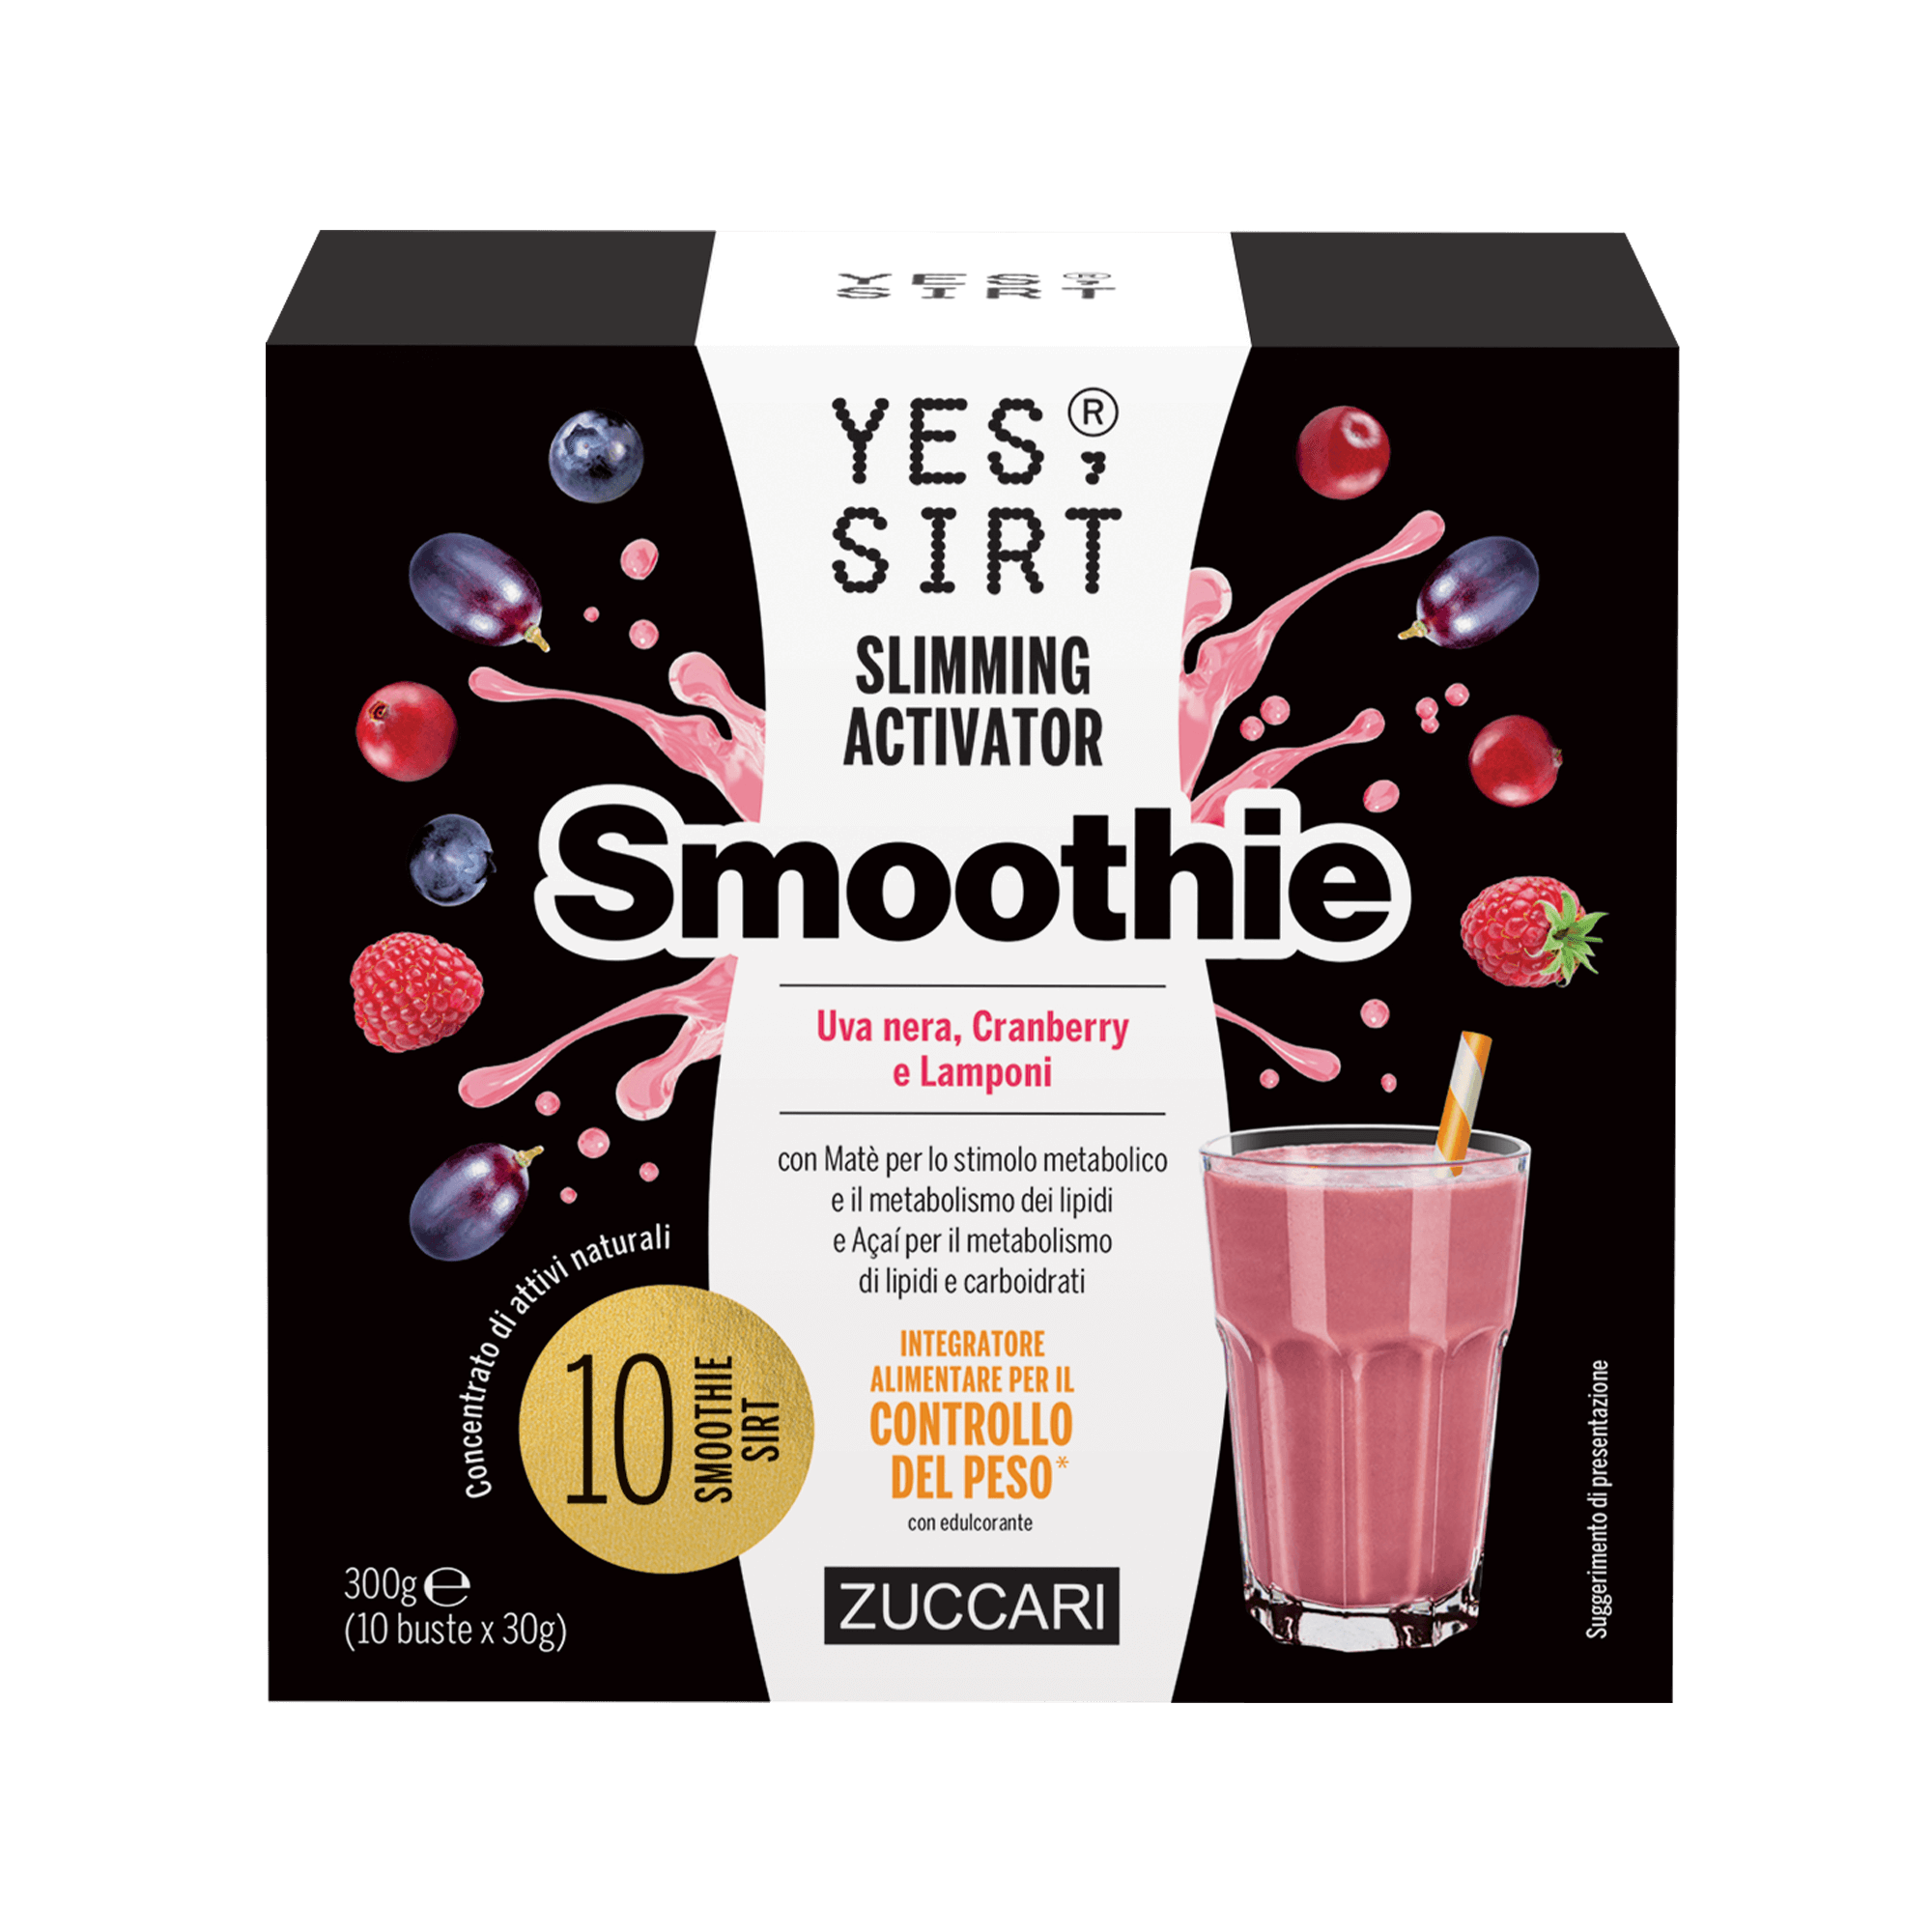 Yes Sirt Slimming Activator Smoothie Uva nera, Cranberry e Lamponi